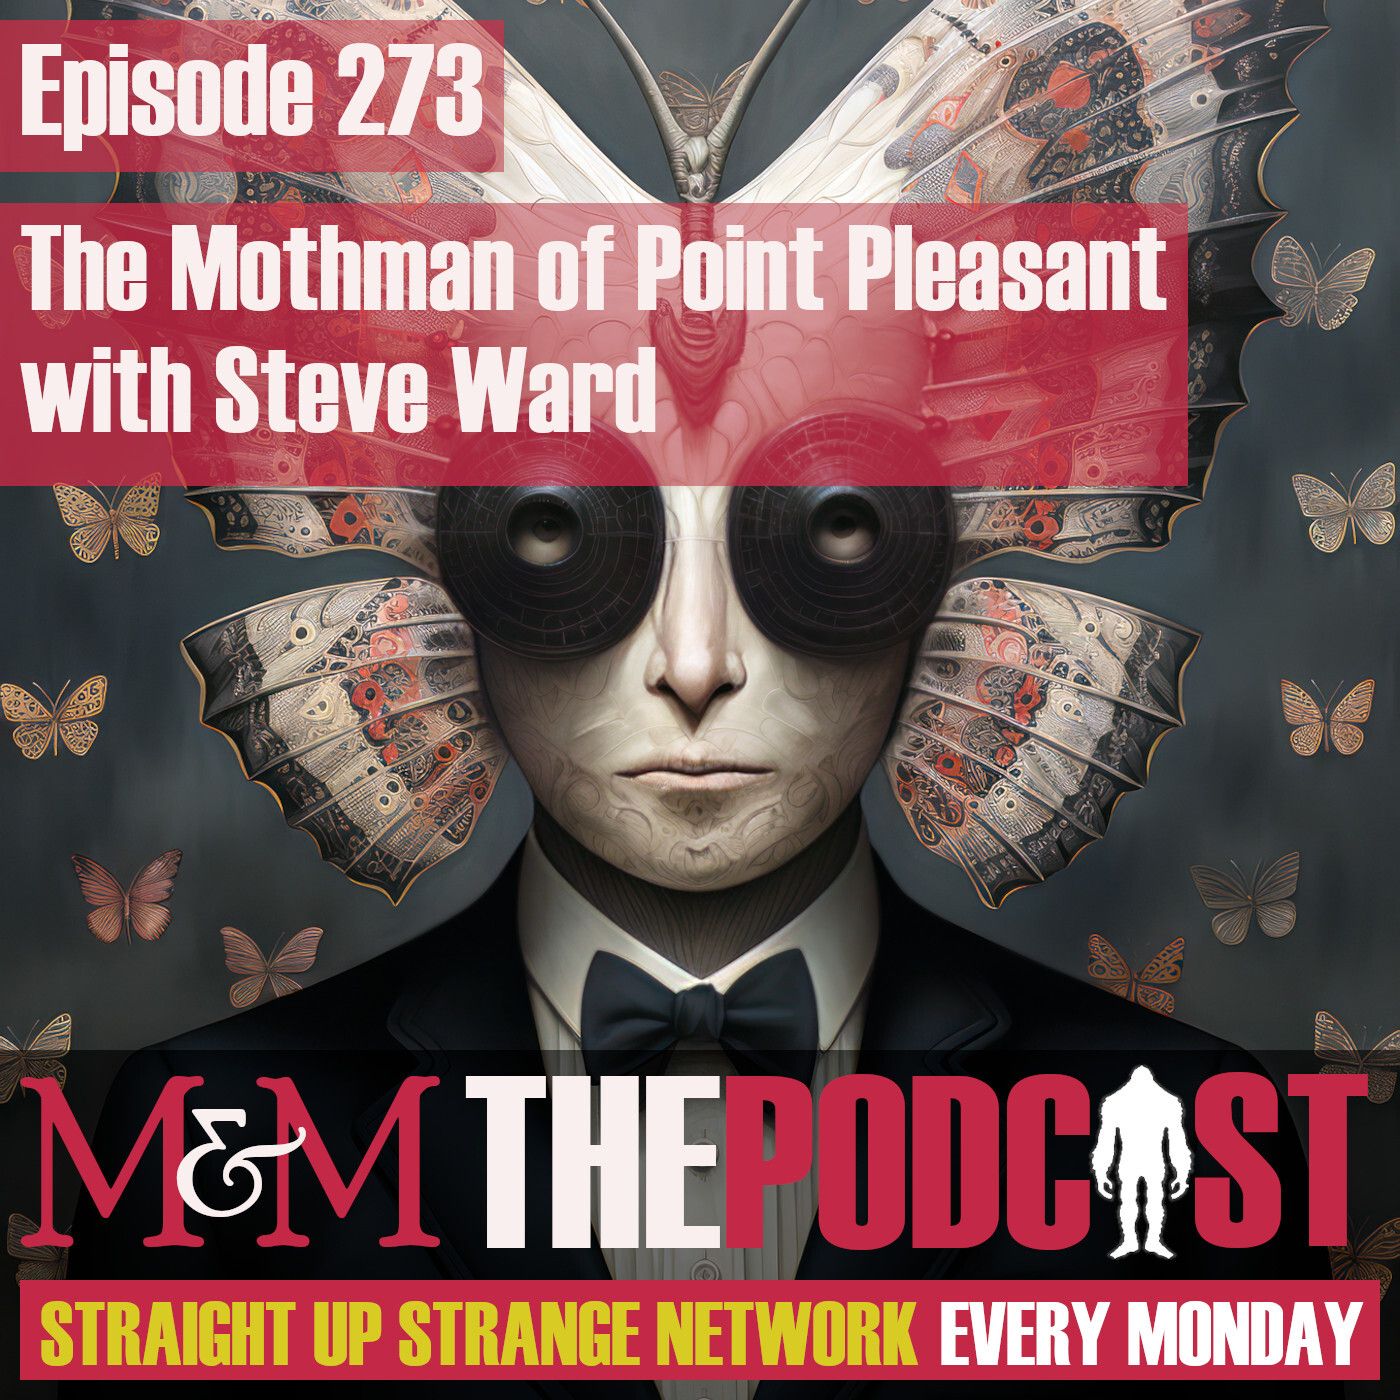 Mysteries and Monsters: Episode 273 The Mothman of Point Pleasant with Steve Ward